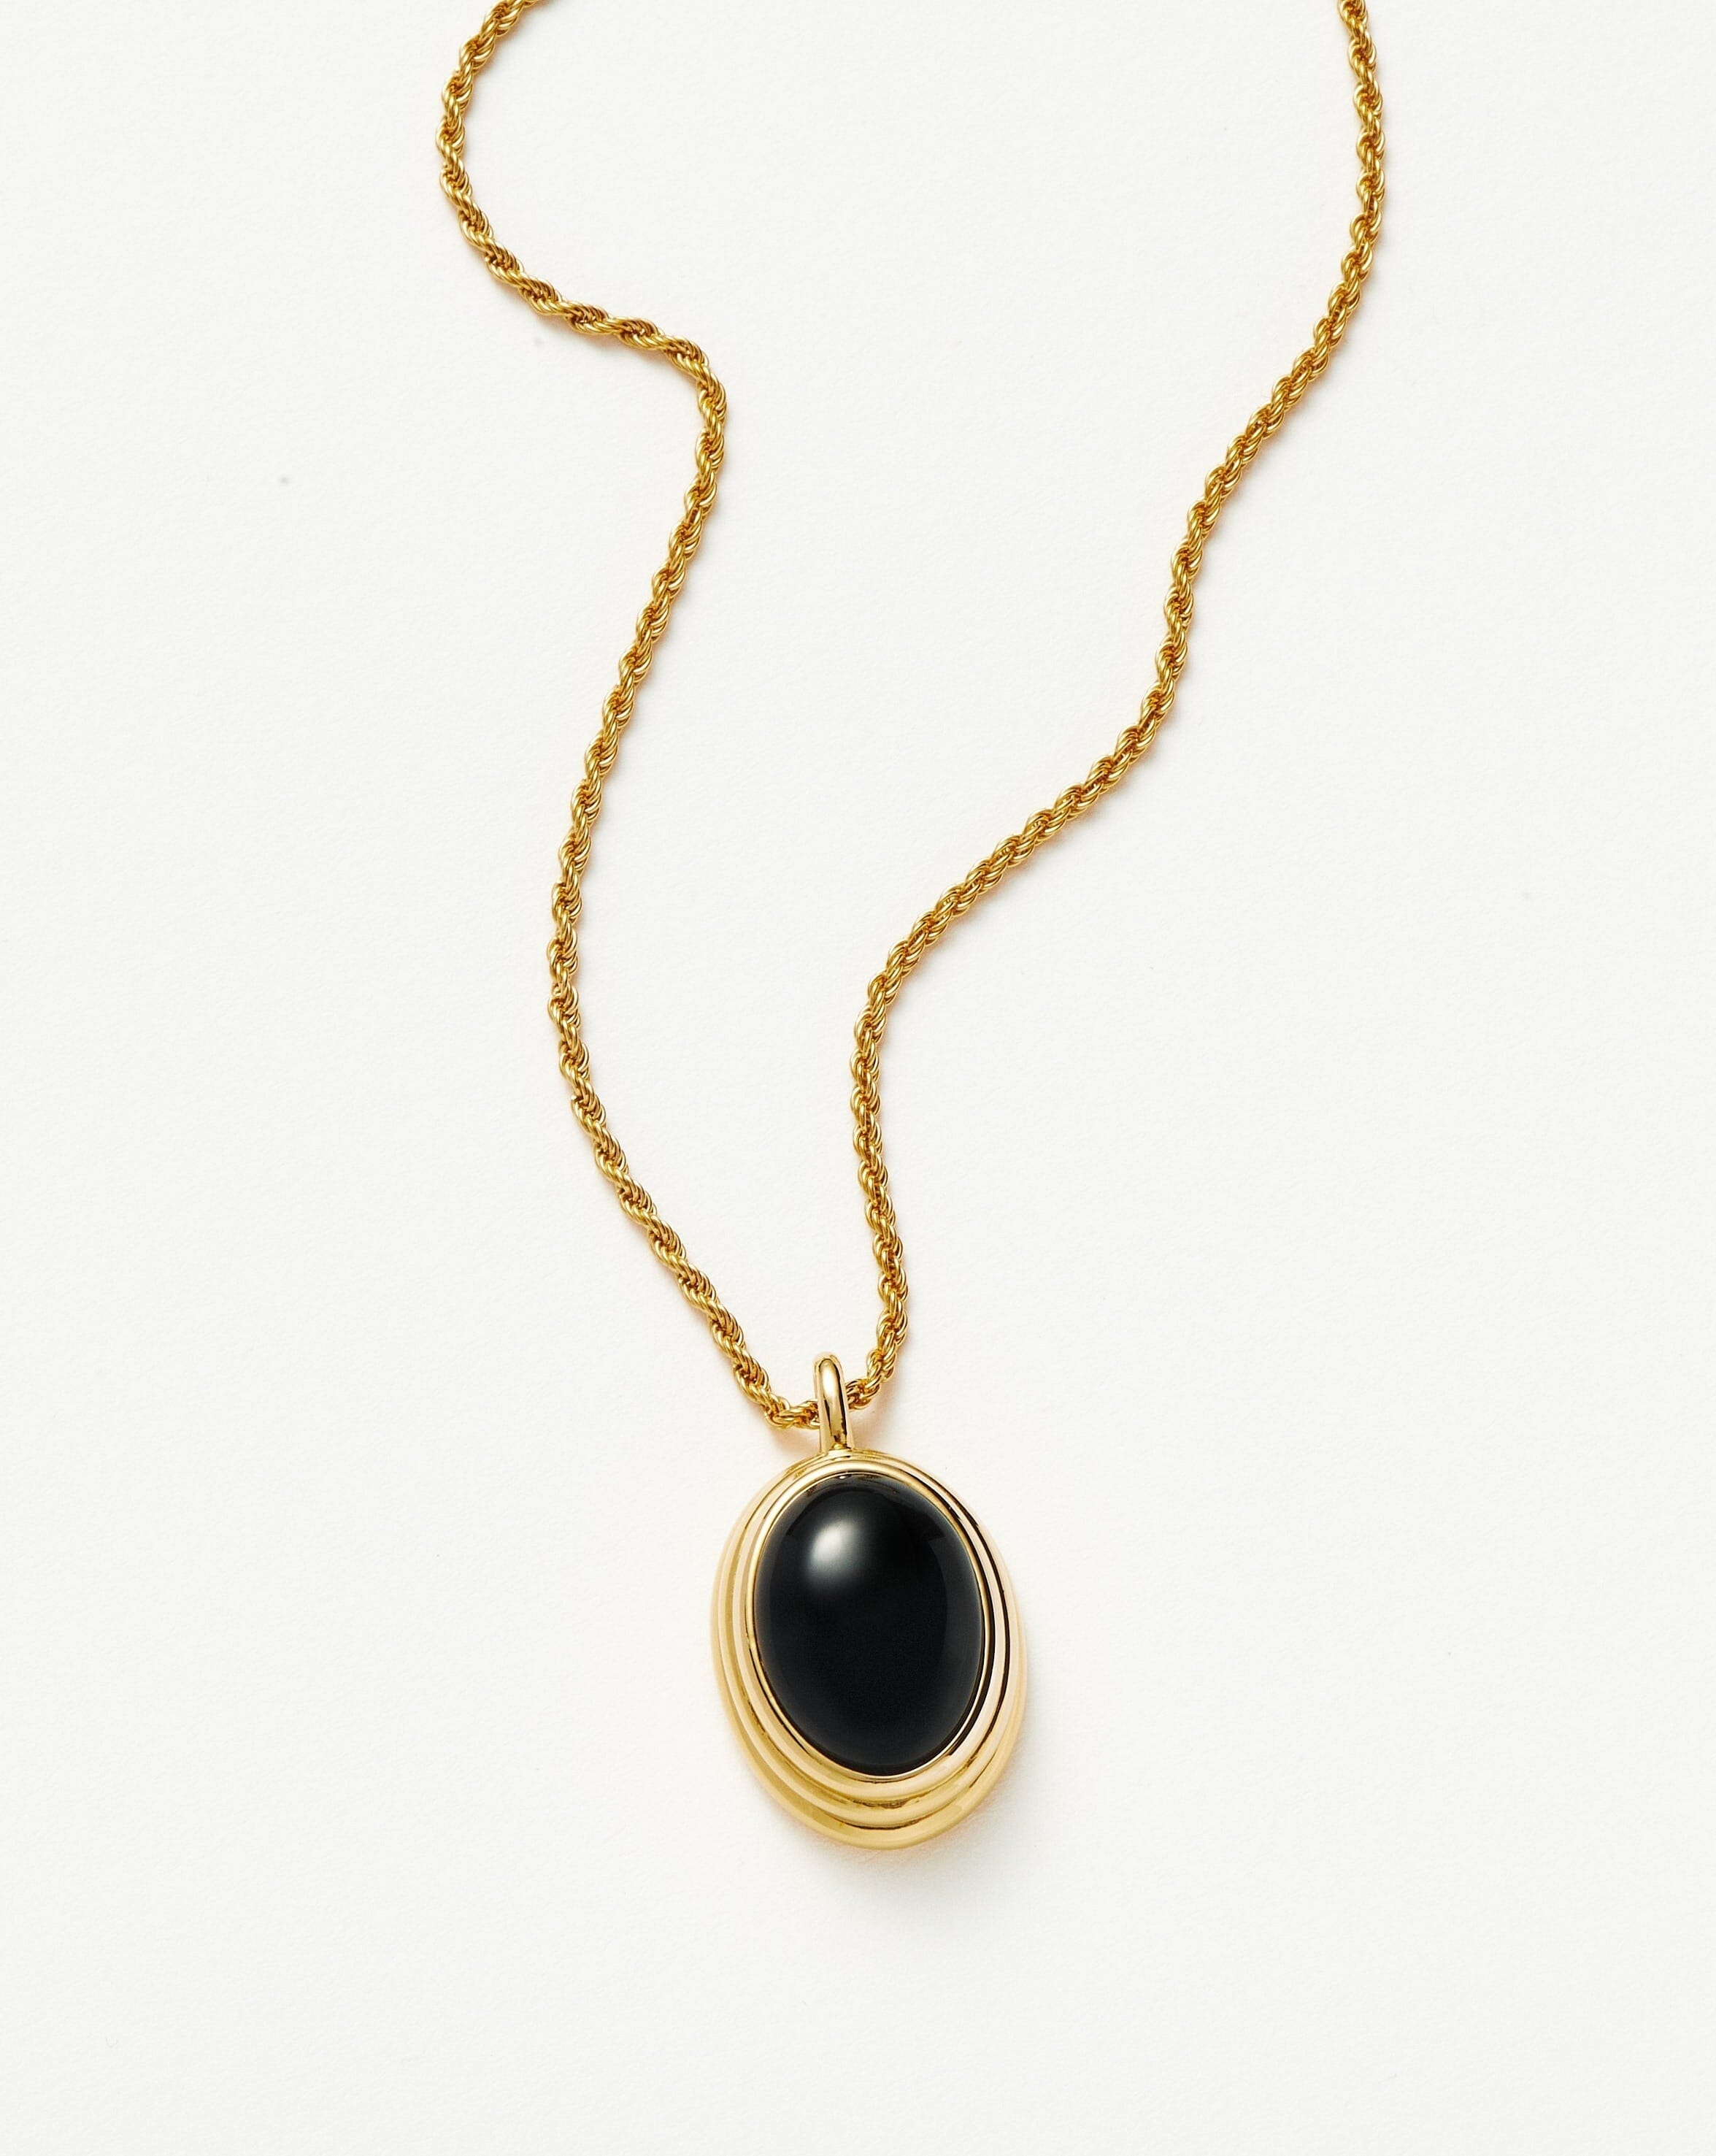 Tenvis, 1/5 (5 mm) Gold-tone Onyx Leather Necklace